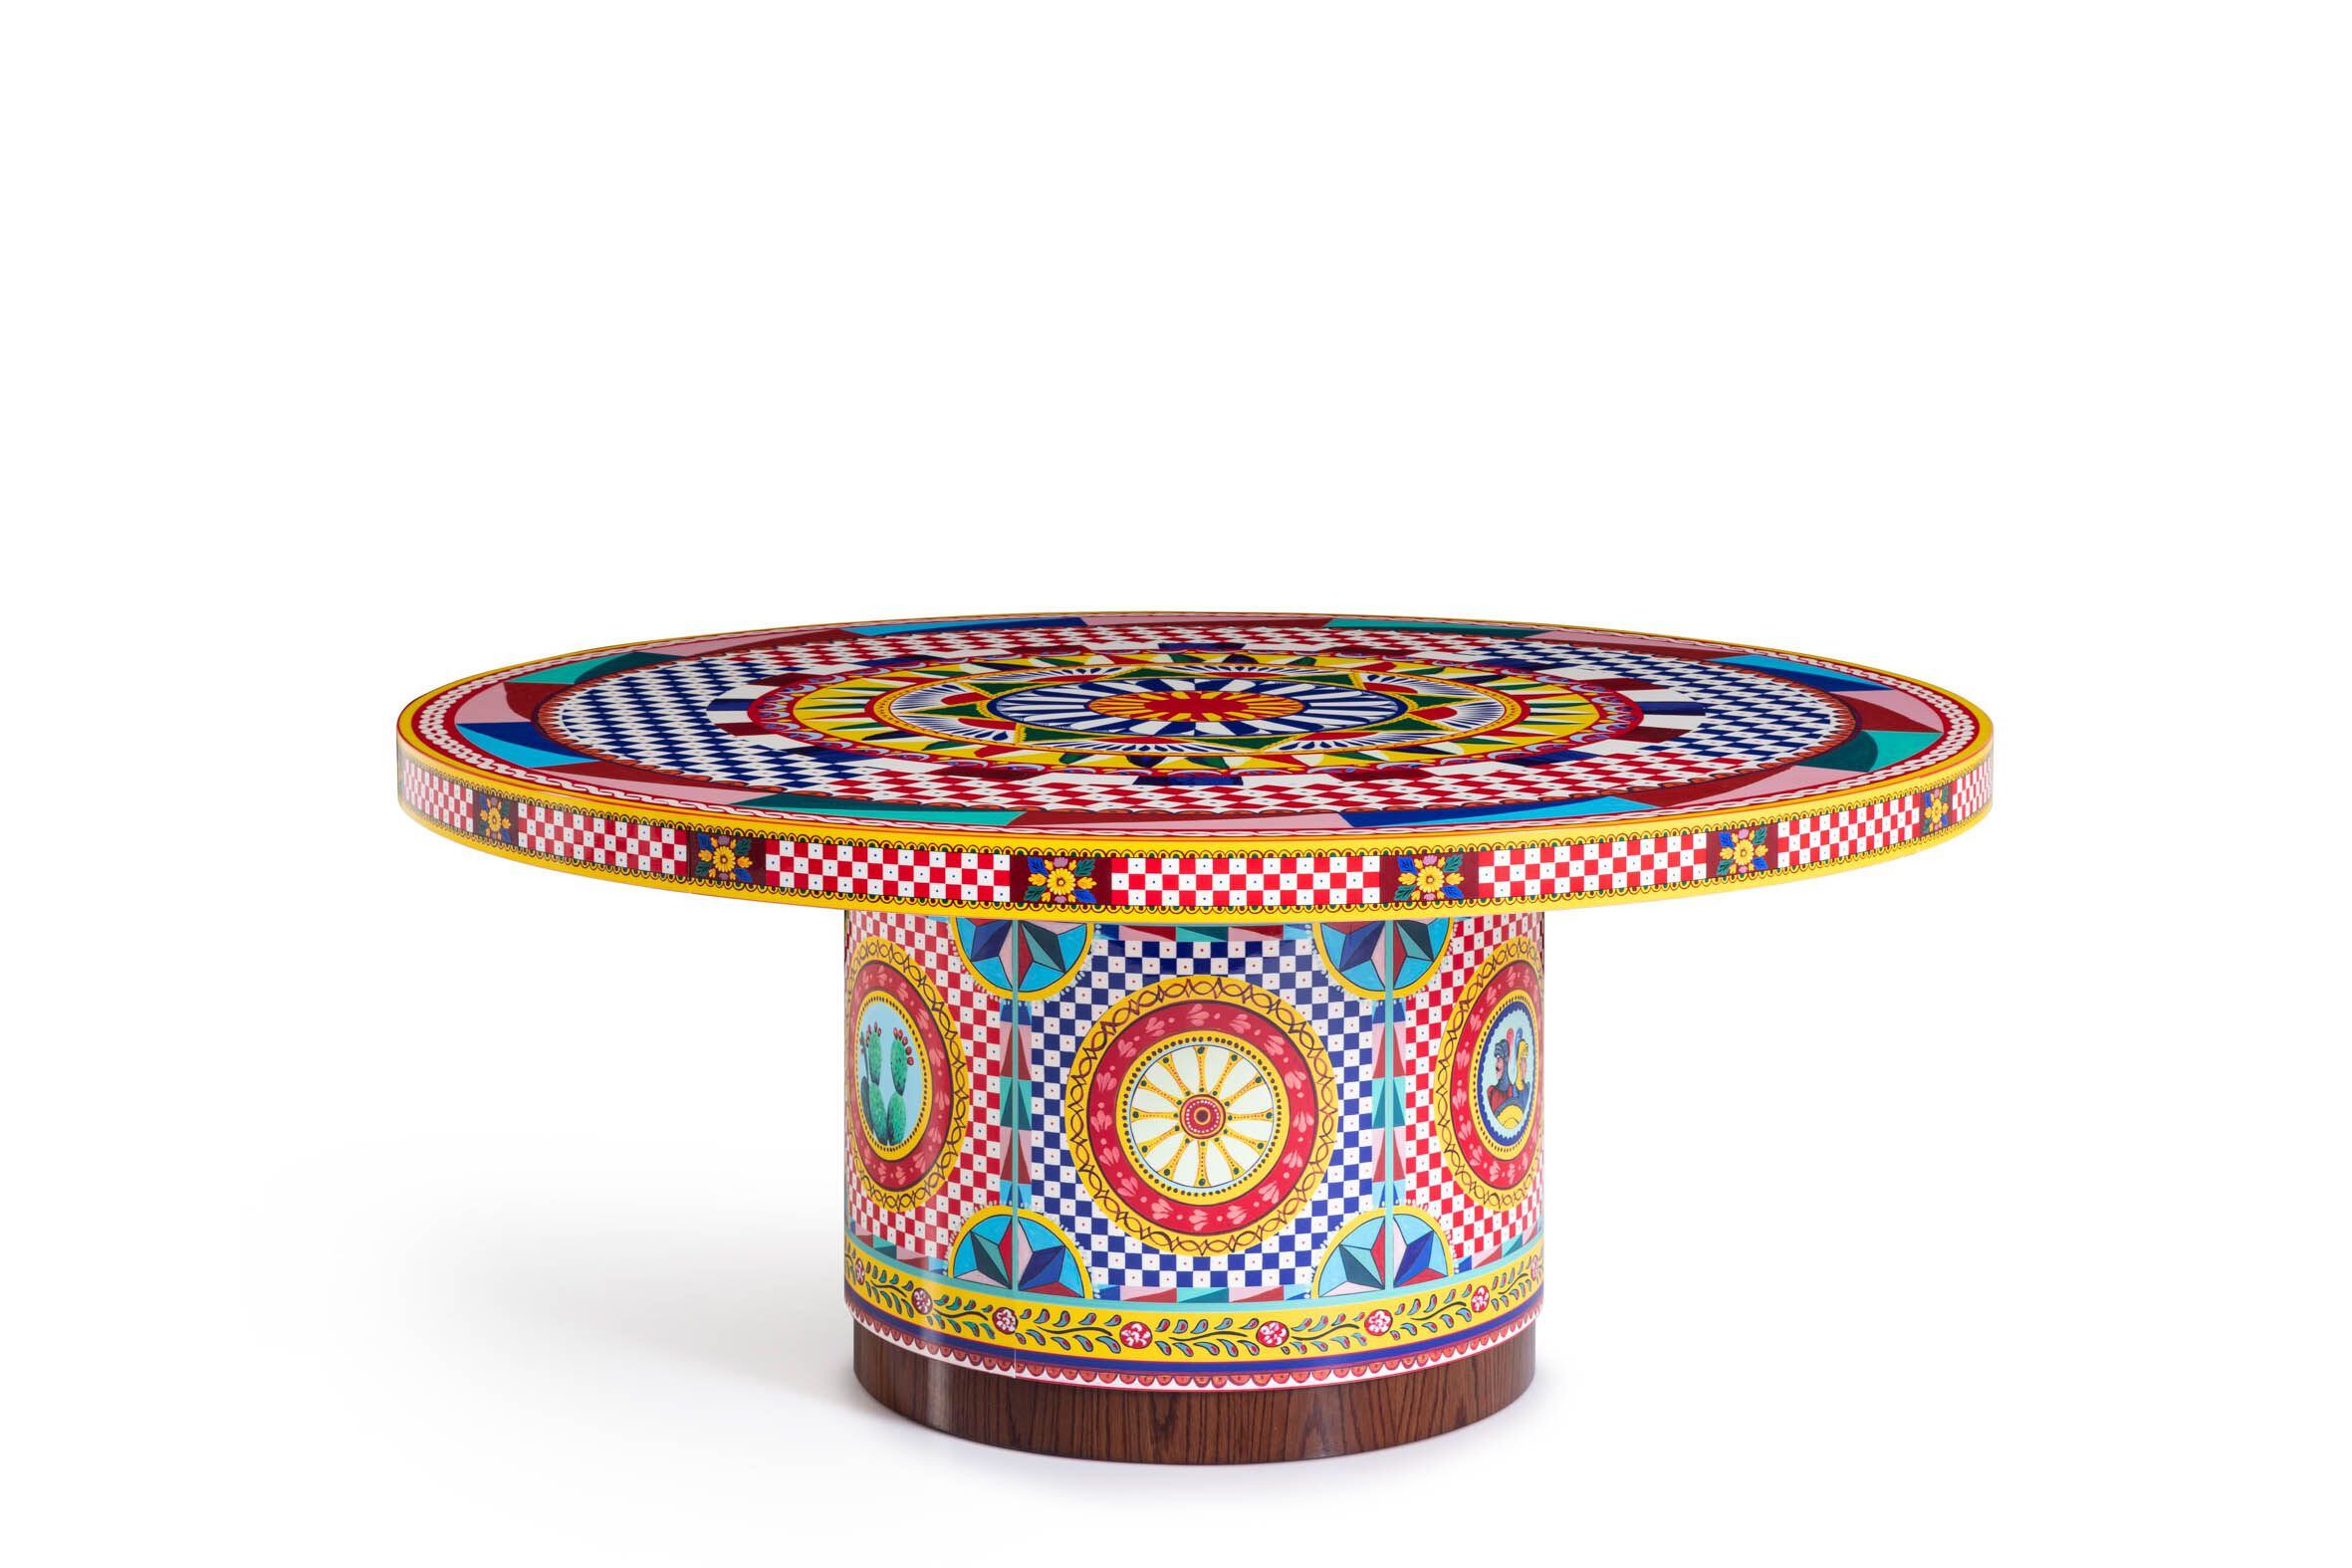 Dolce & Gabbana launches dedicated Home Collection: a first look